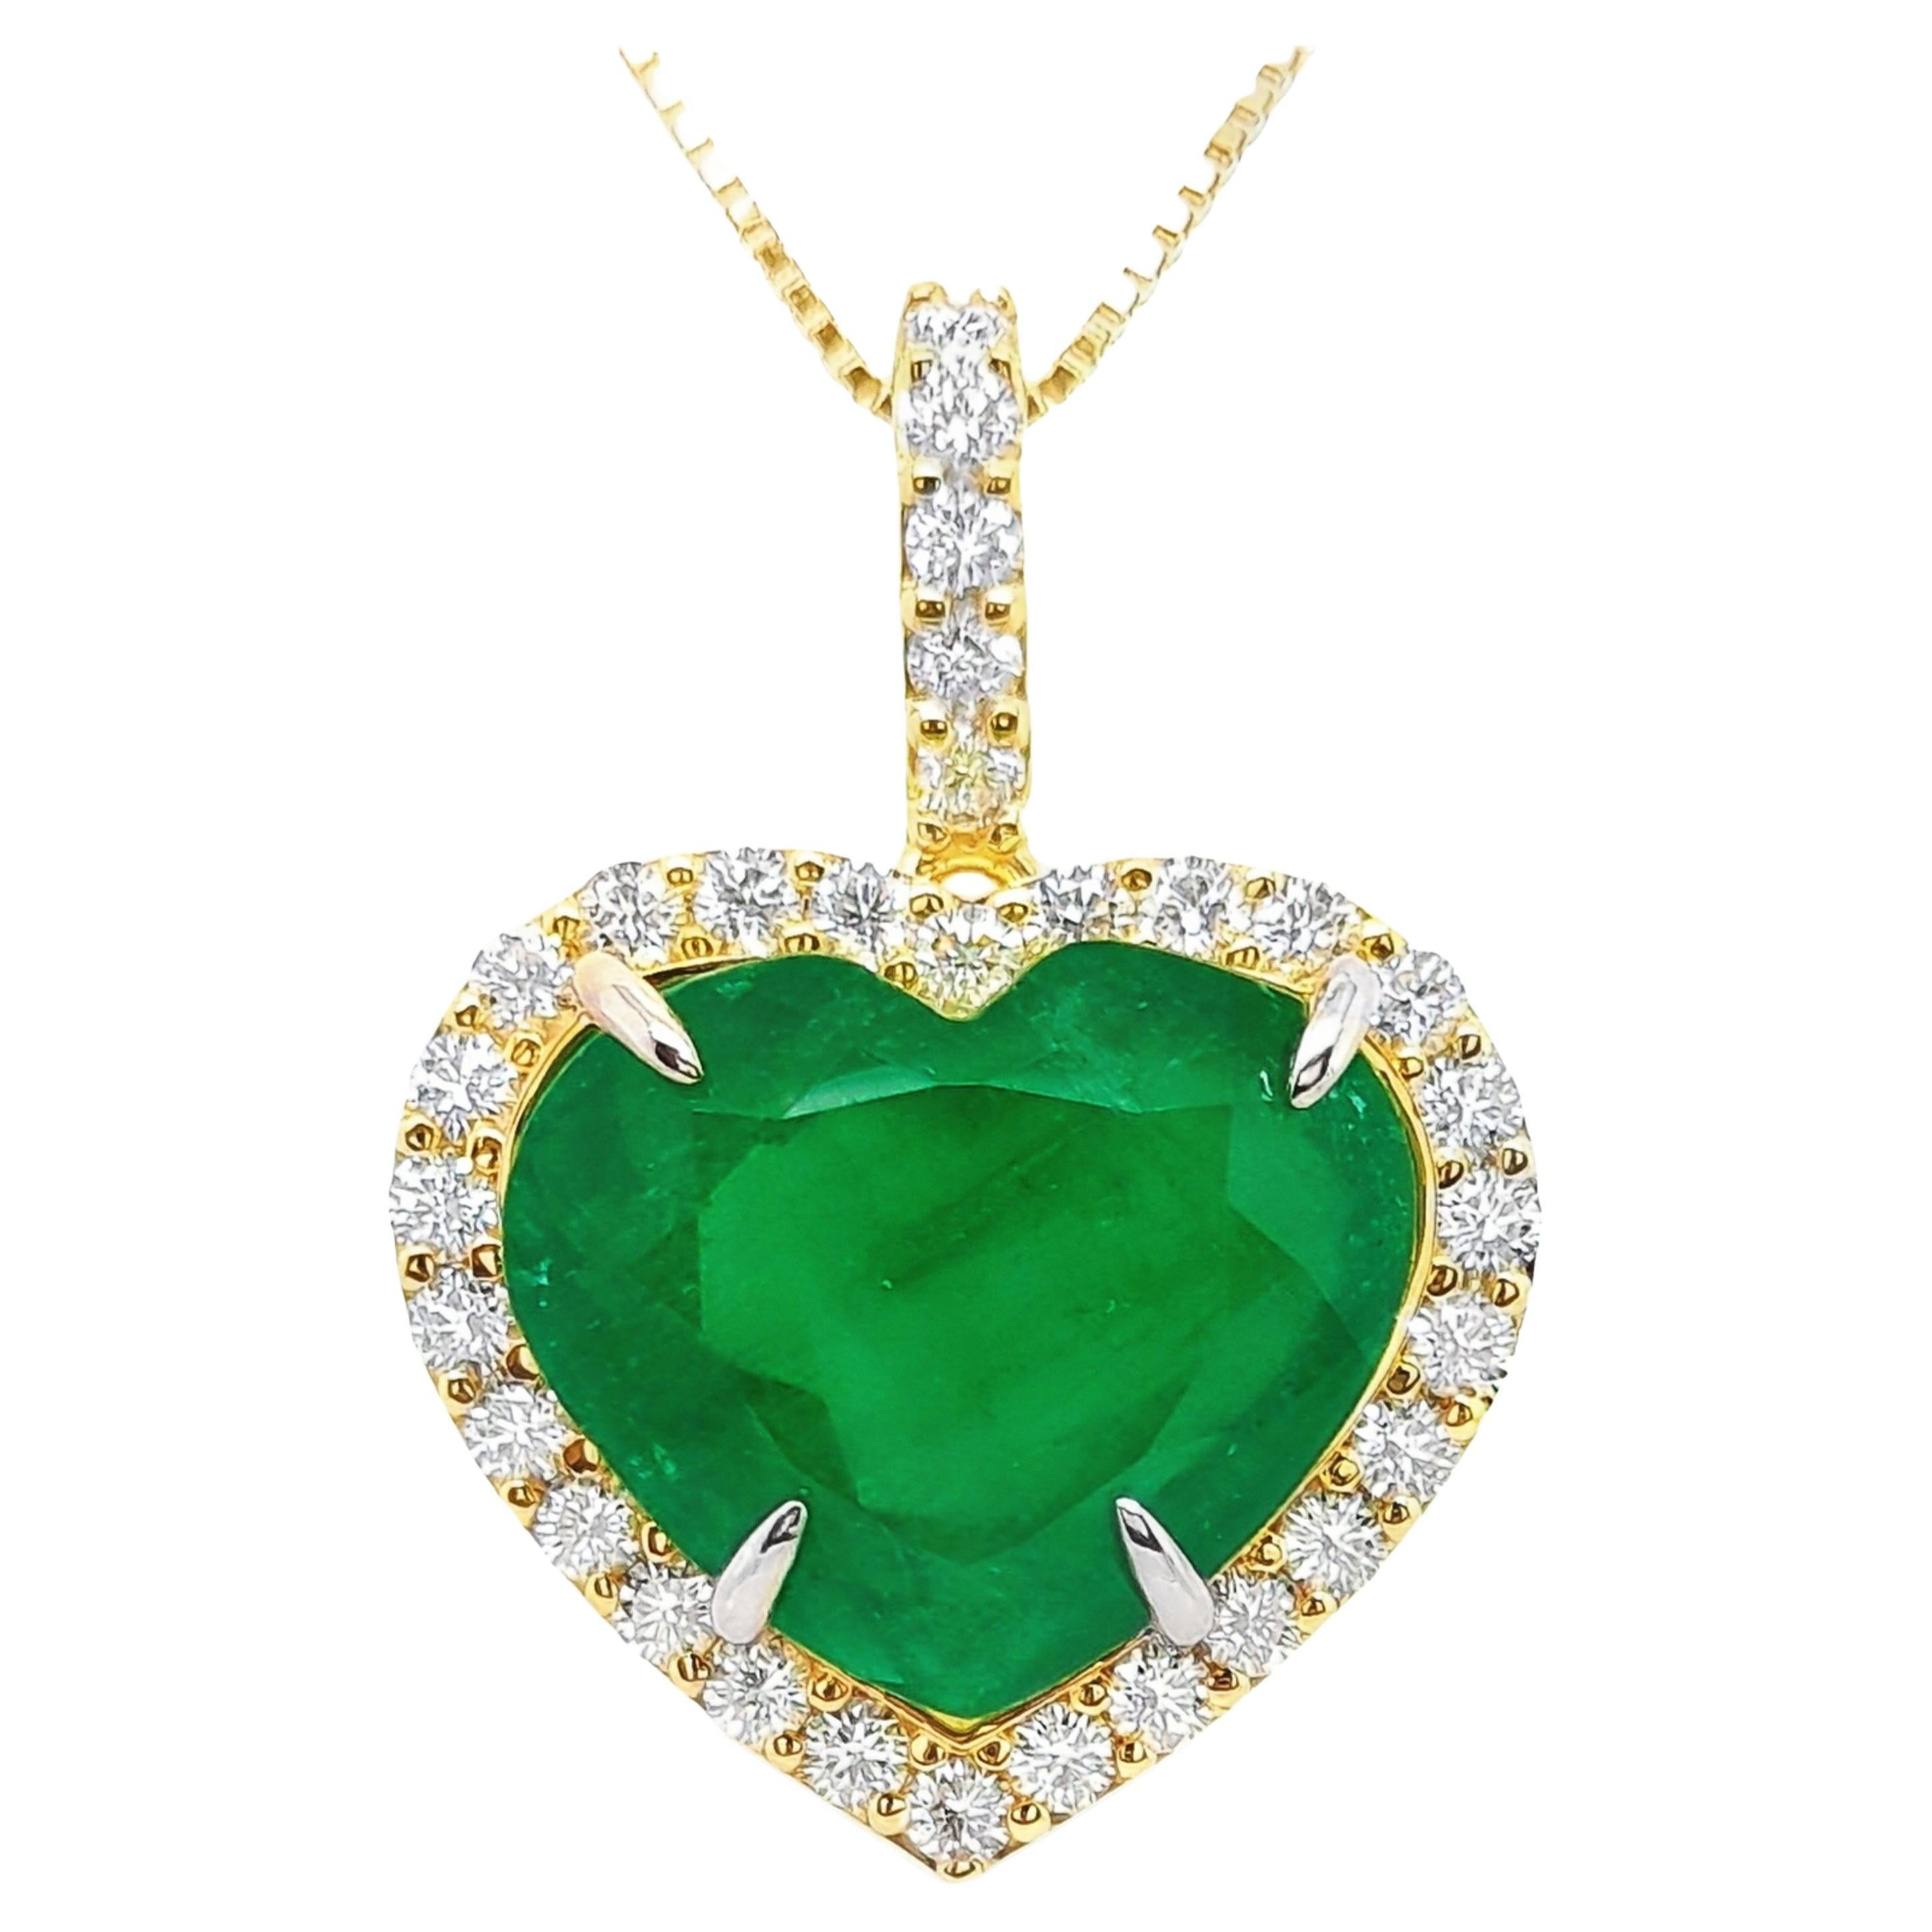 IGI Certified 21.20ct Colombia Emerald 1.60ct Diamonds 18K Yellow Gold Necklace For Sale